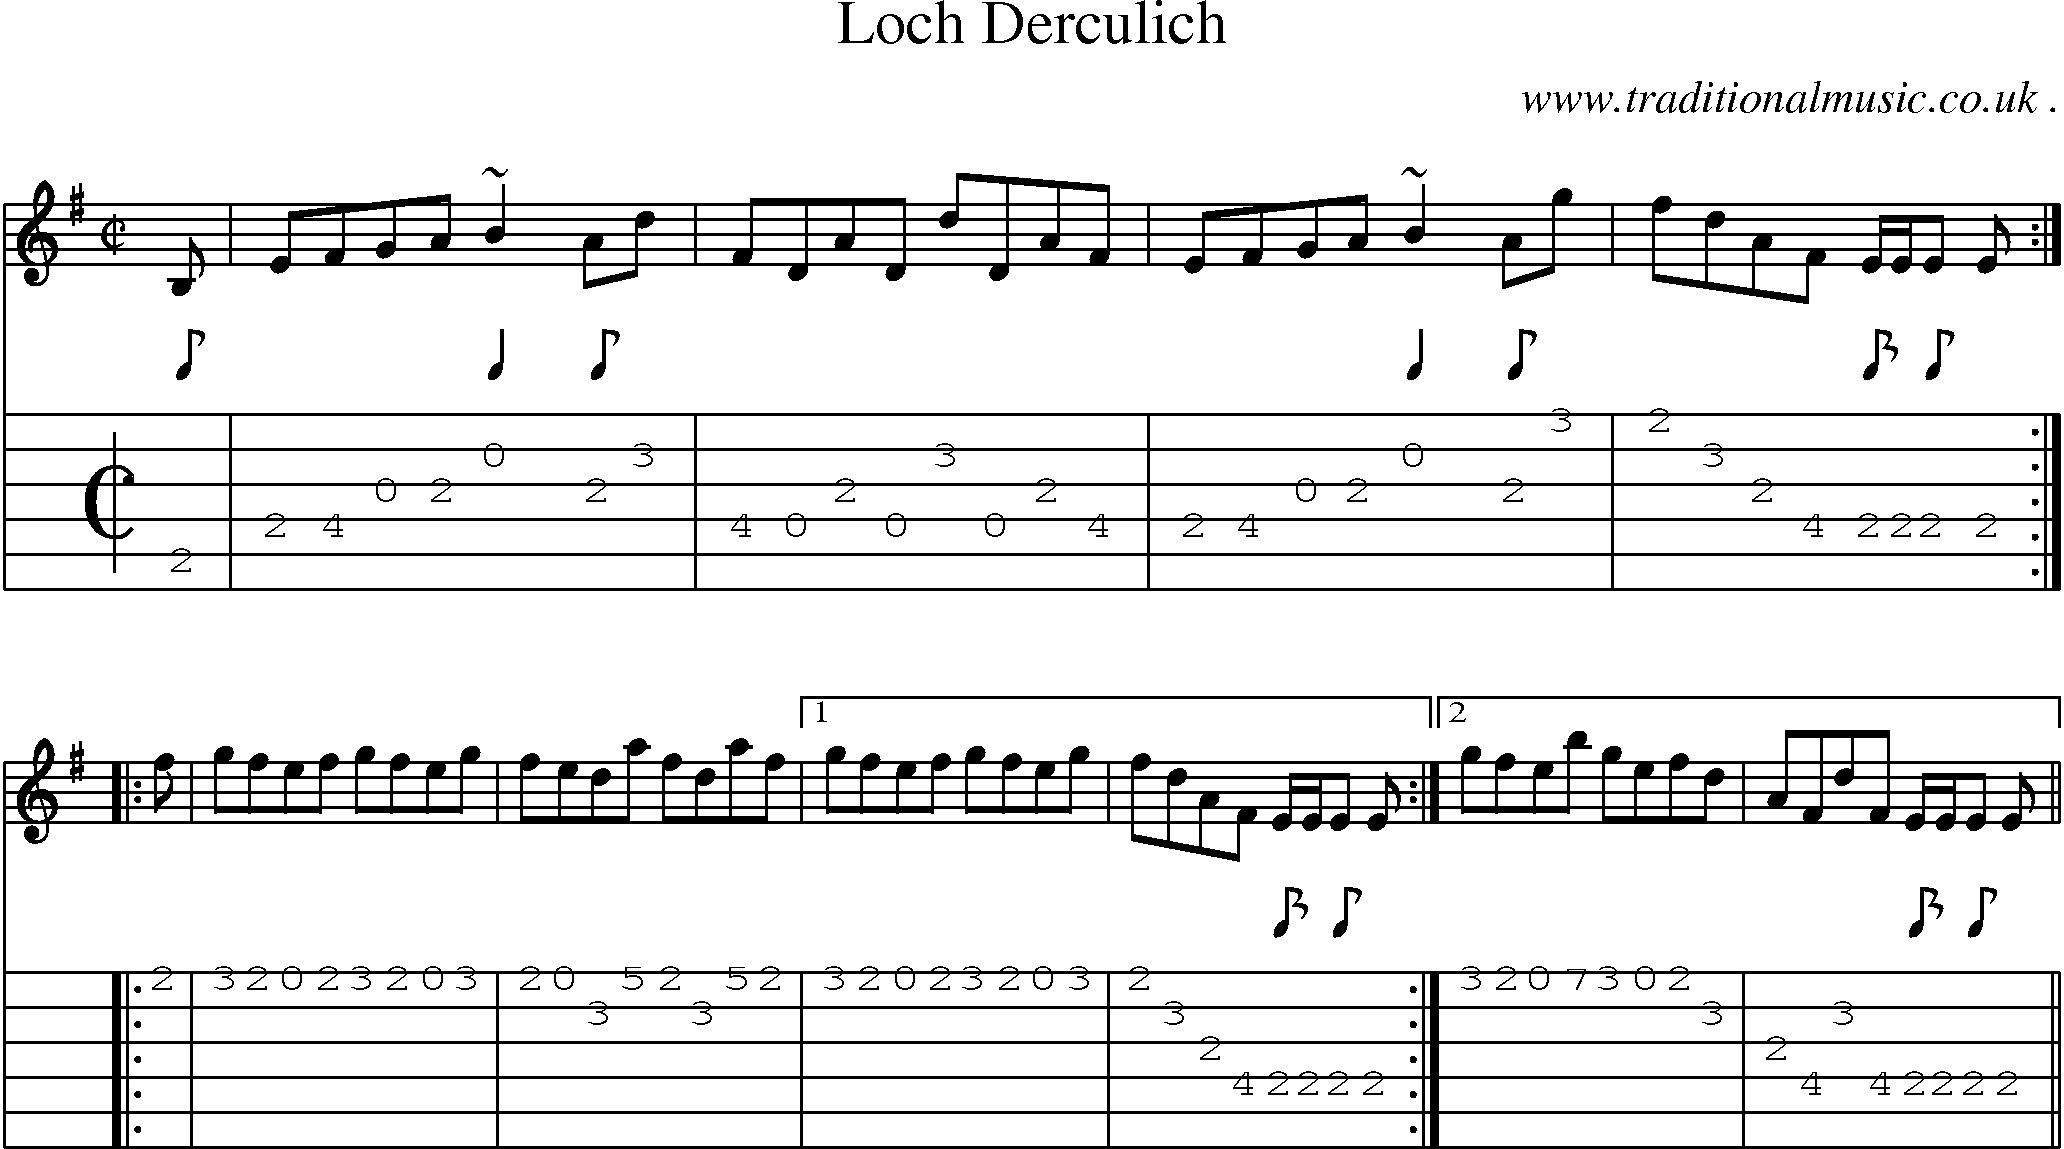 Sheet-music  score, Chords and Guitar Tabs for Loch Derculich